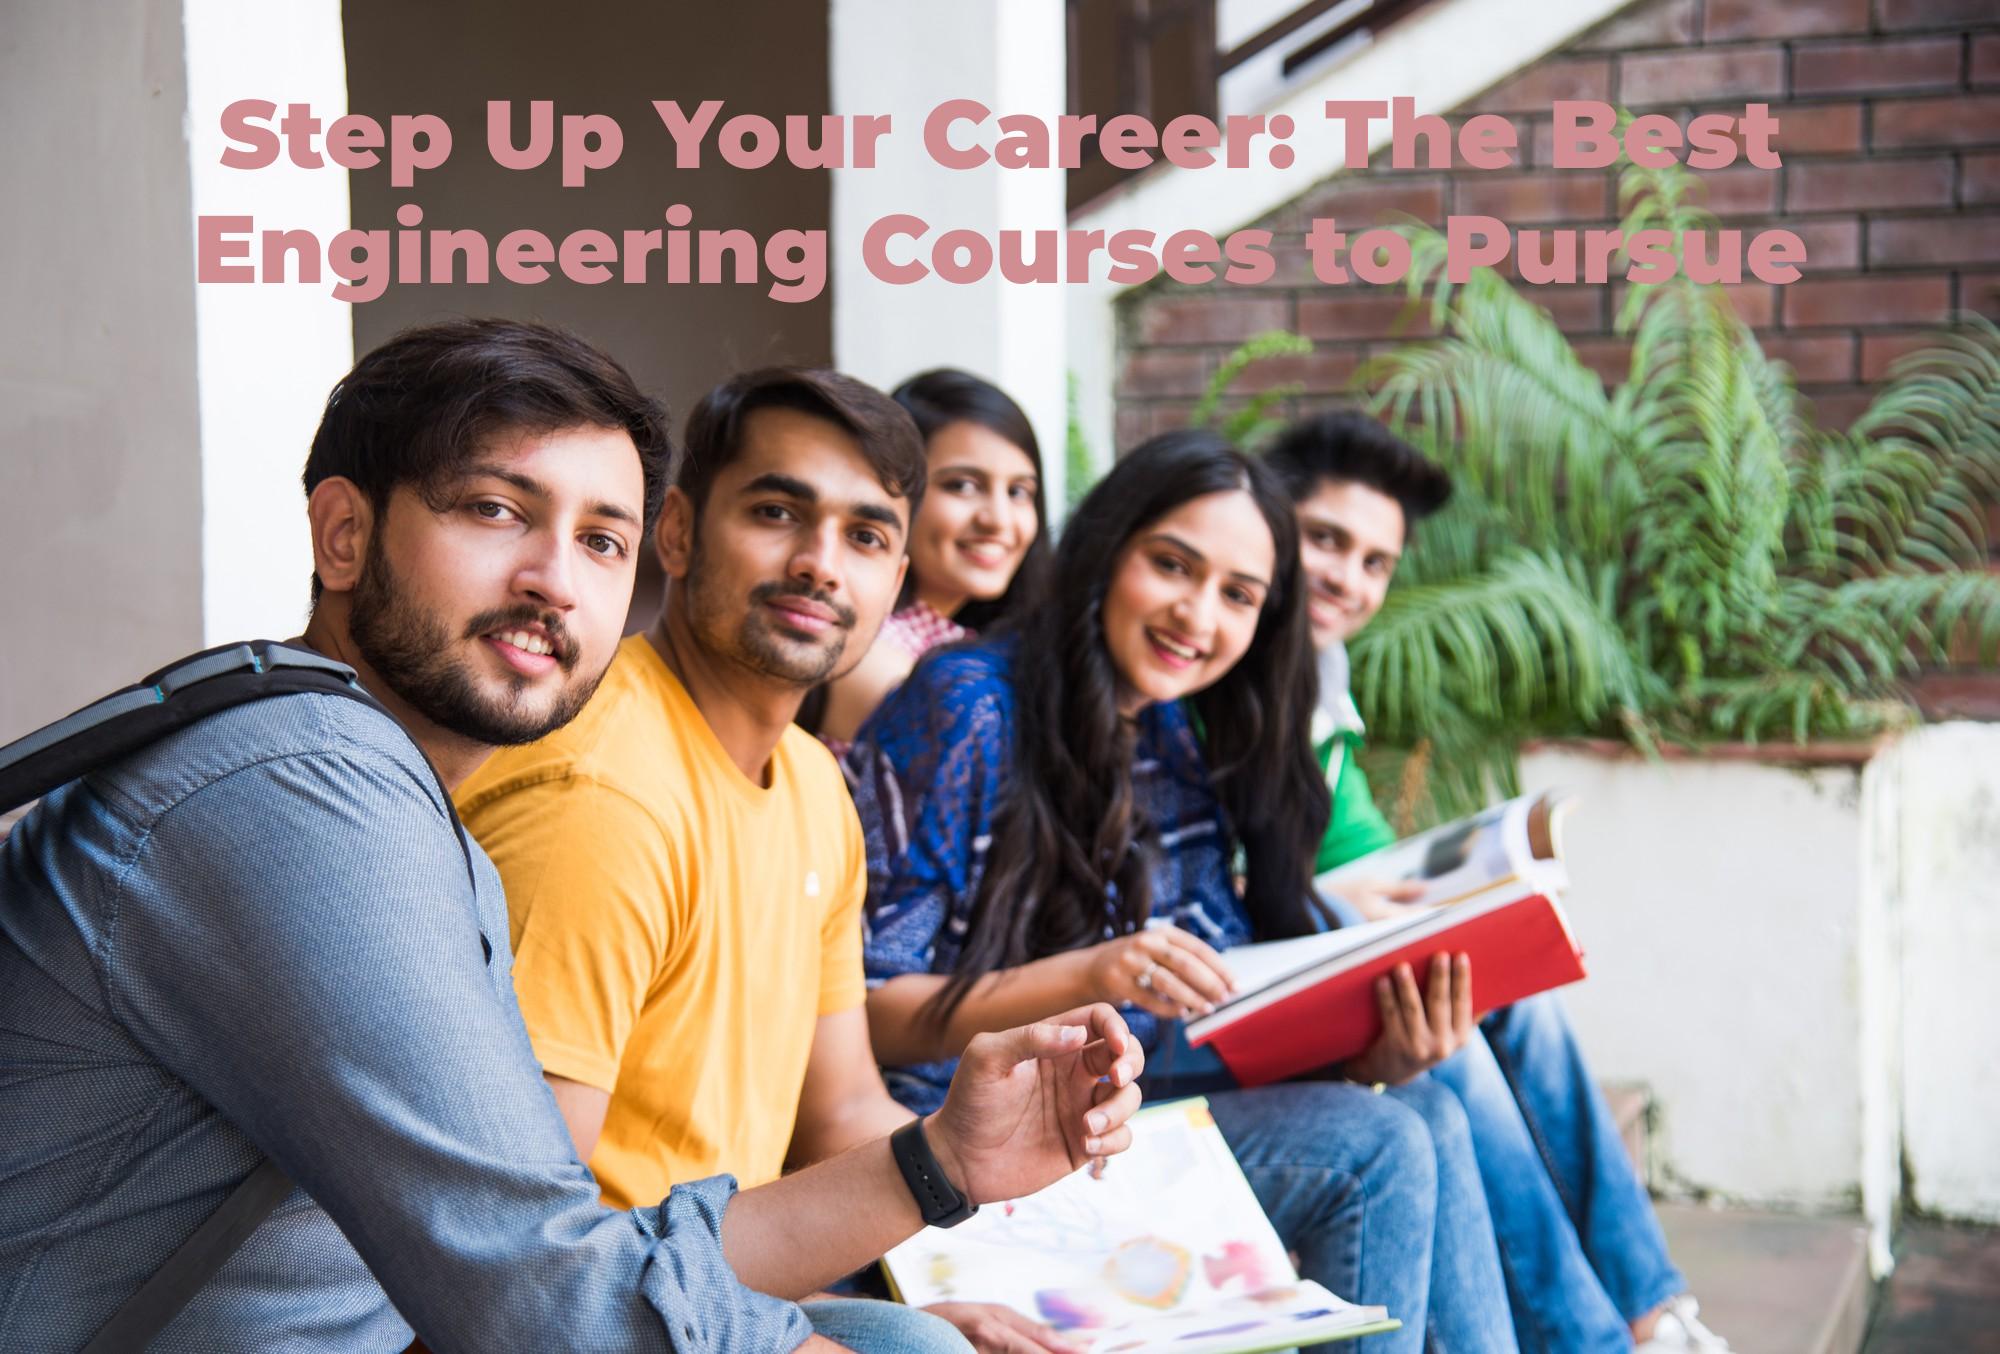 Step Up Your Career: The Best Engineering Courses to Pursue